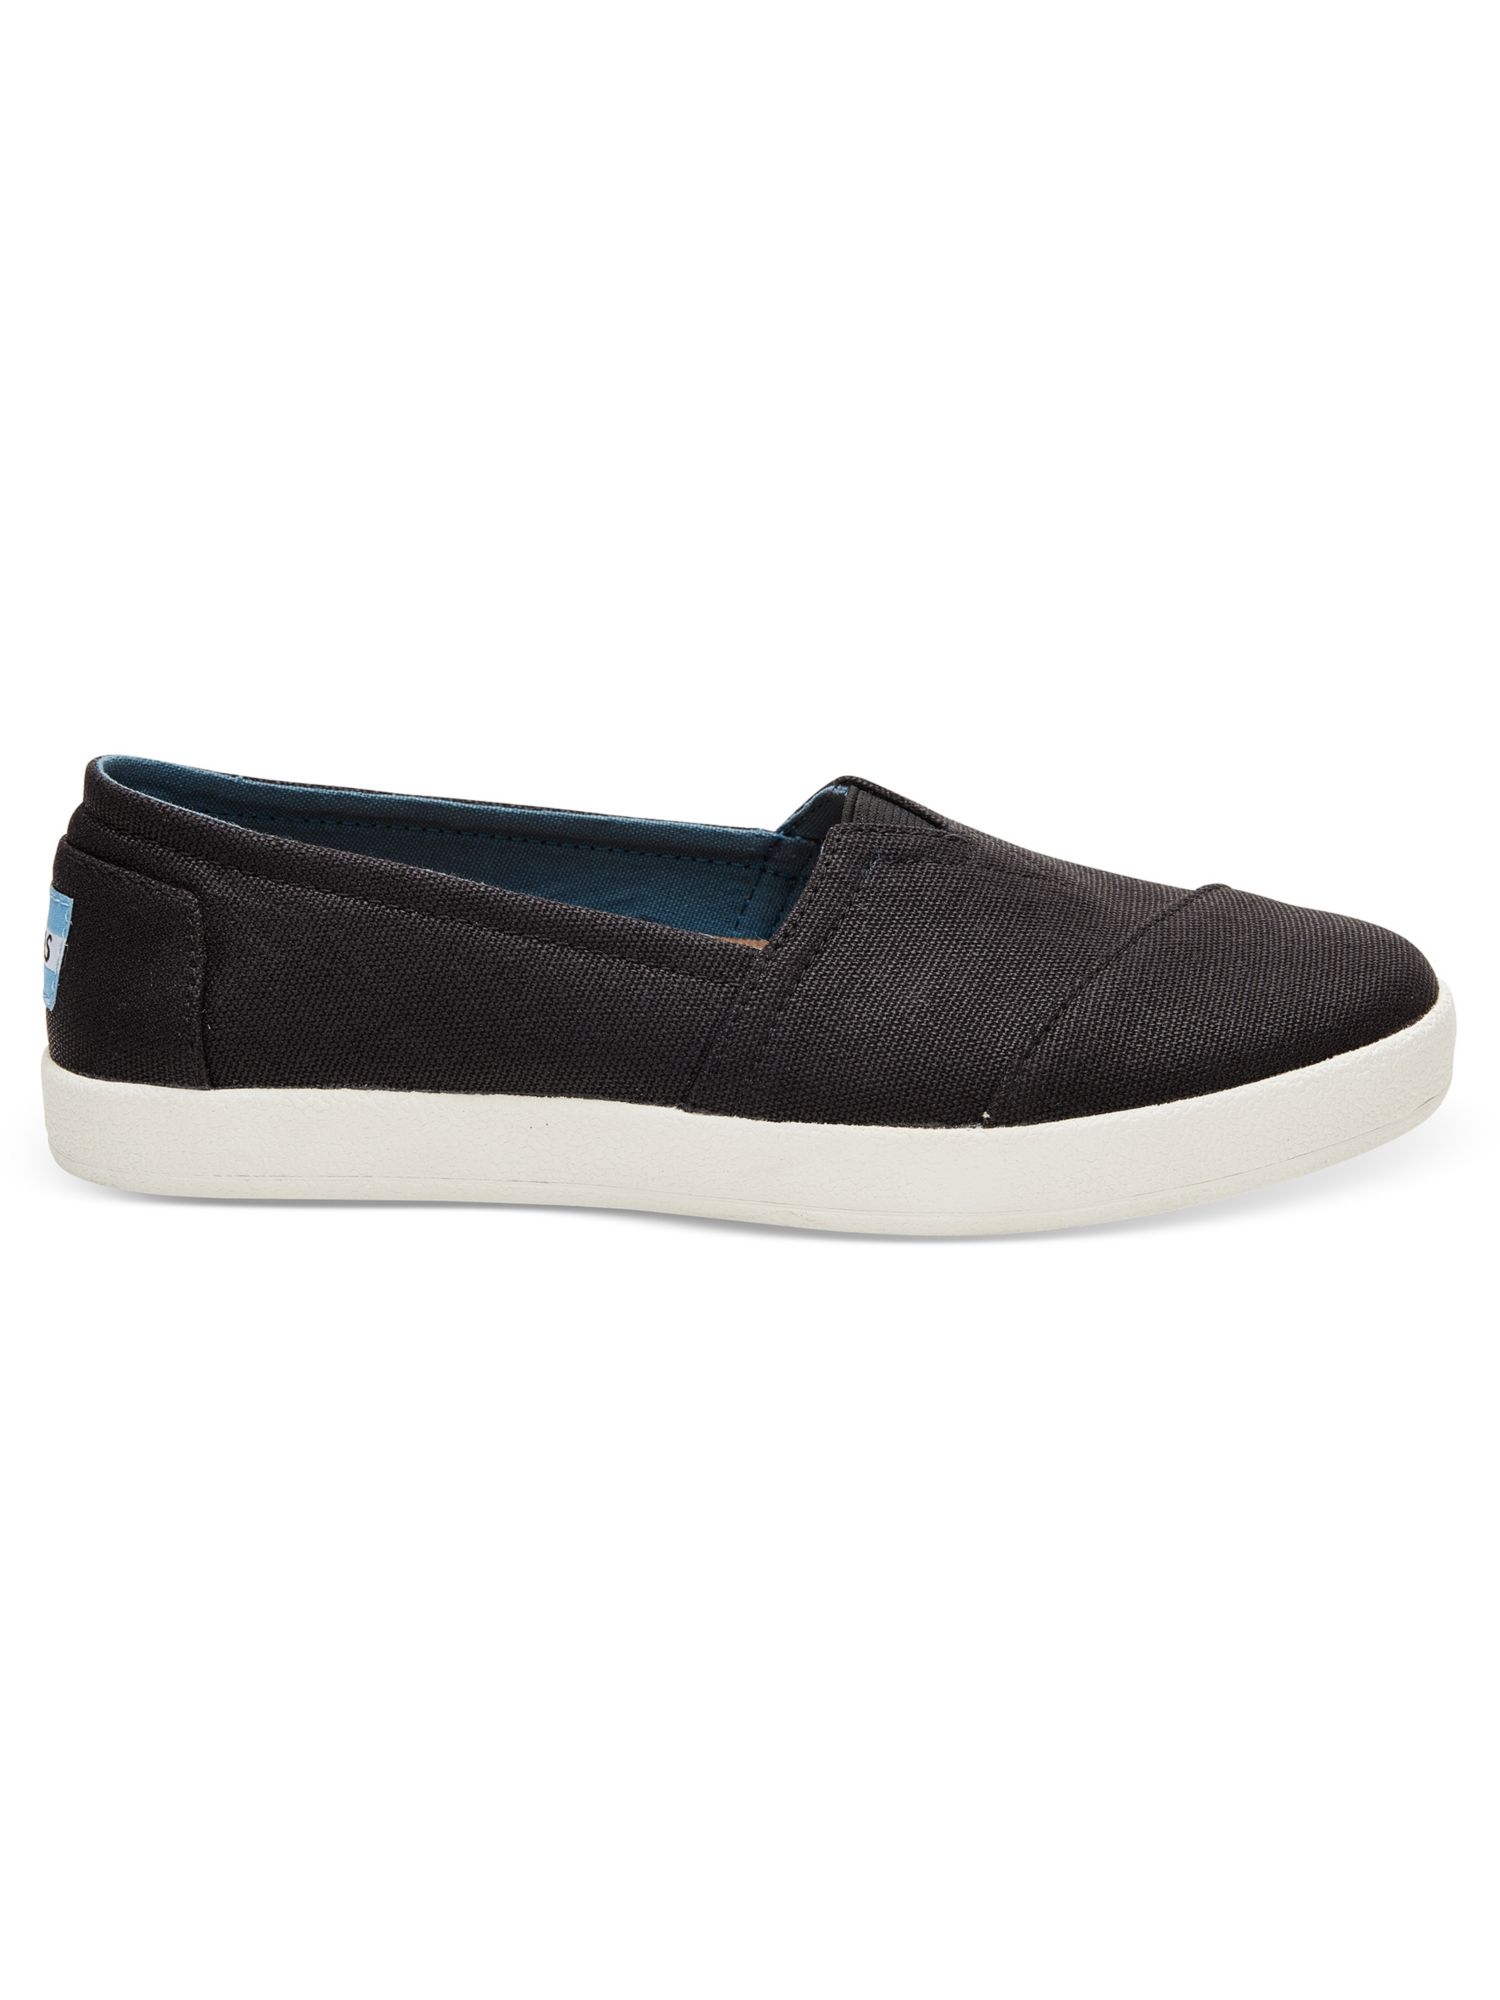 TOMS Womens Black Canvas Removable Insole Cushioned Alparagata Round ...